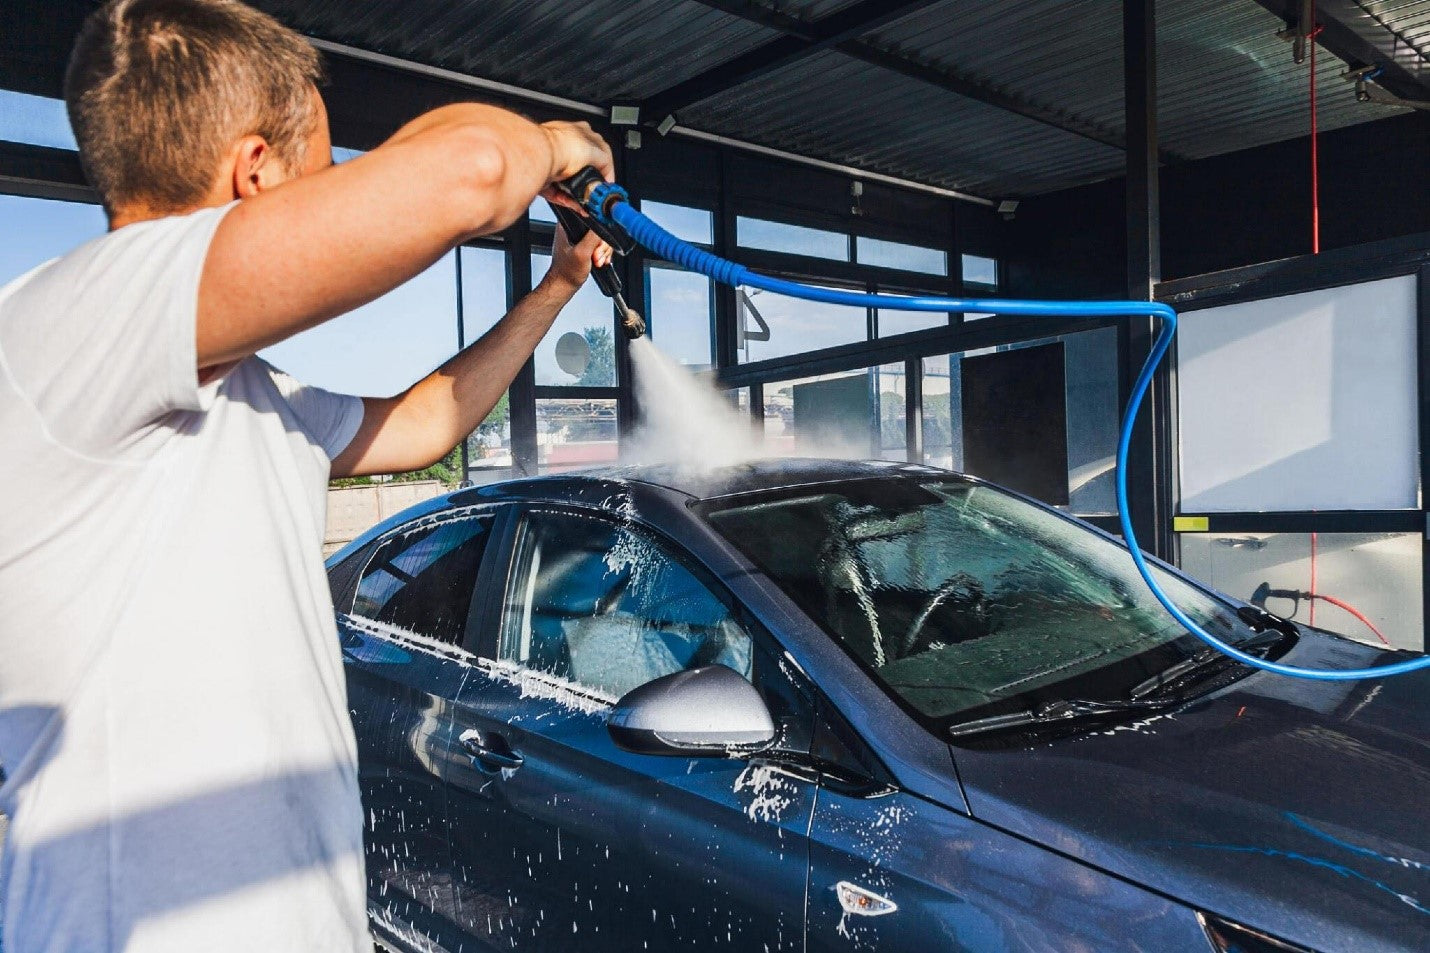 A man washes his car at a self-service car wash using a hose with pressurized water car carez blog image carcarez blog